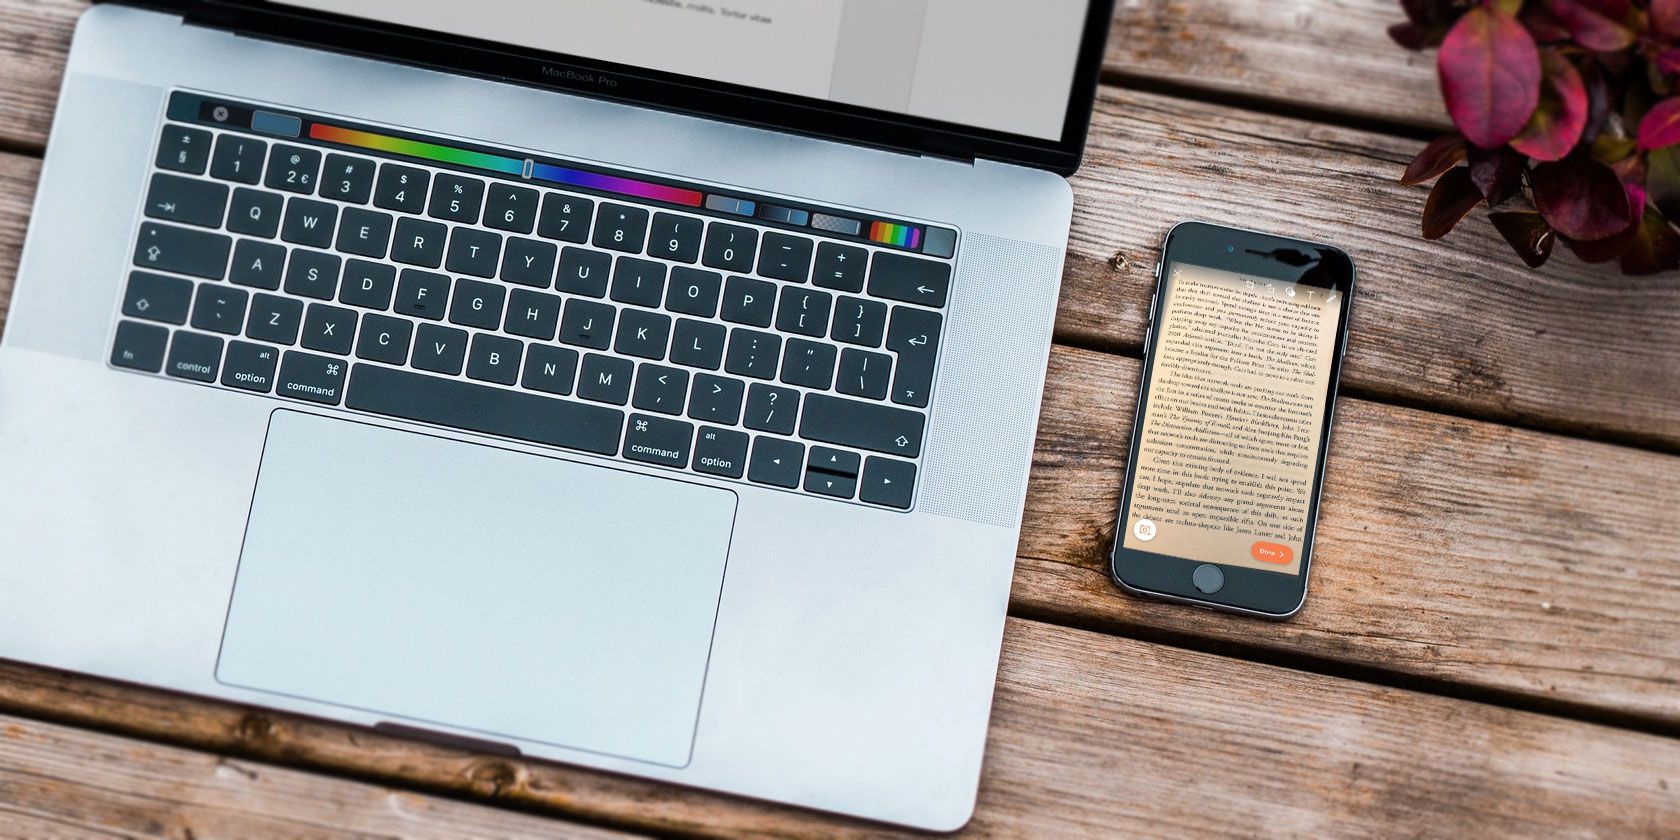 How To Scan Documents Into Your Mac Using An Iphone